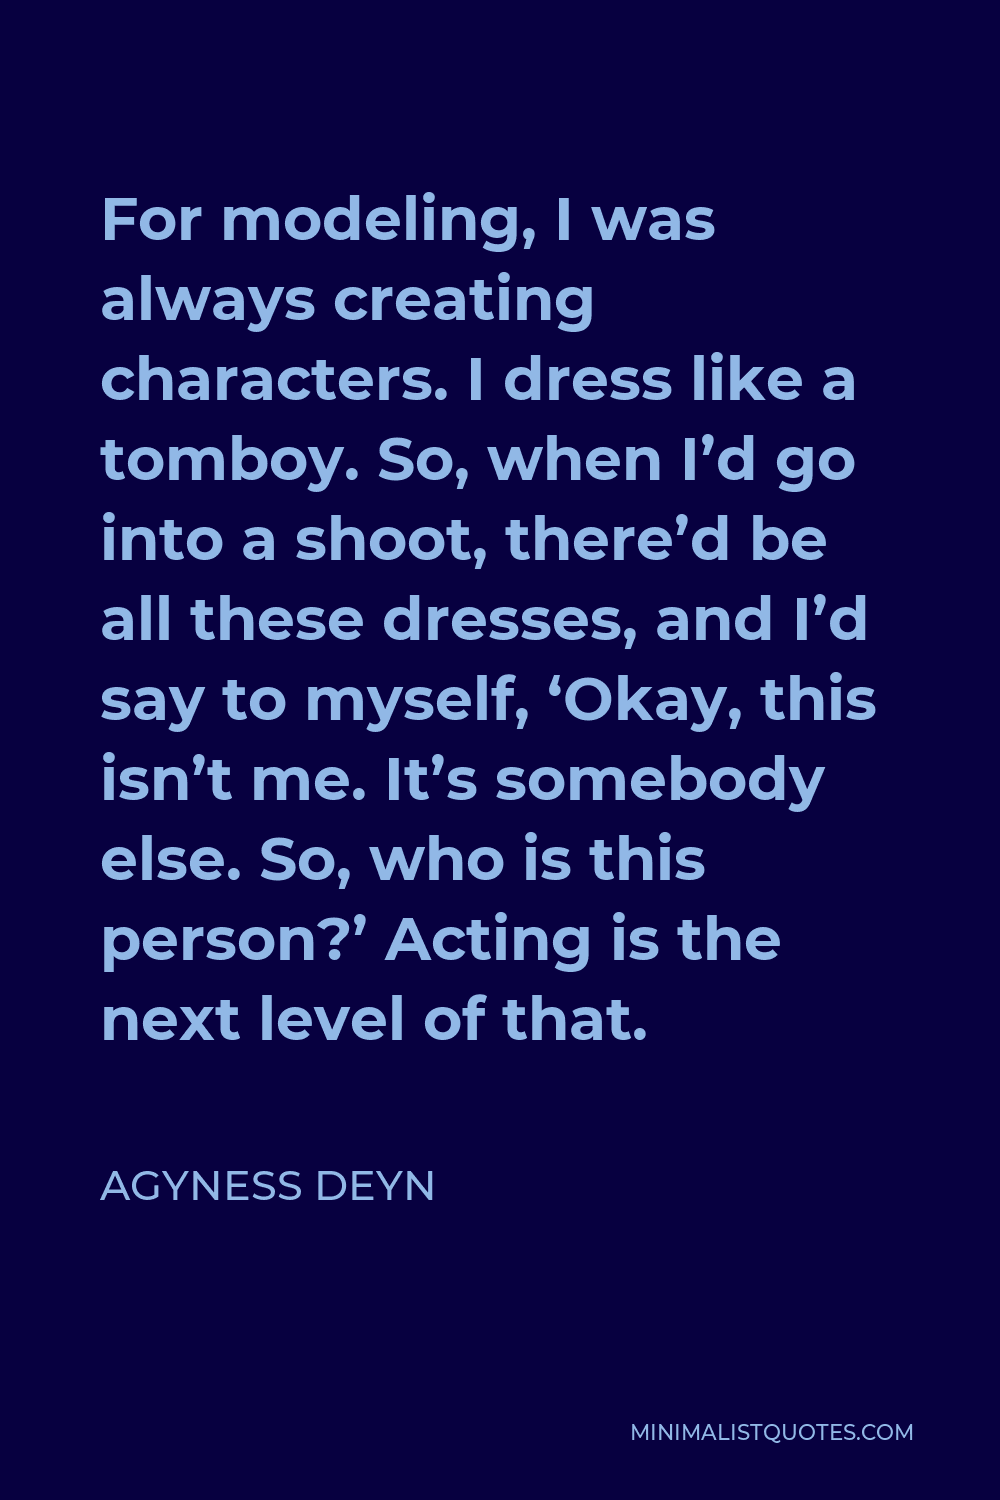 Agyness Deyn Quote - For modeling, I was always creating characters. I dress like a tomboy. So, when I’d go into a shoot, there’d be all these dresses, and I’d say to myself, ‘Okay, this isn’t me. It’s somebody else. So, who is this person?’ Acting is the next level of that.